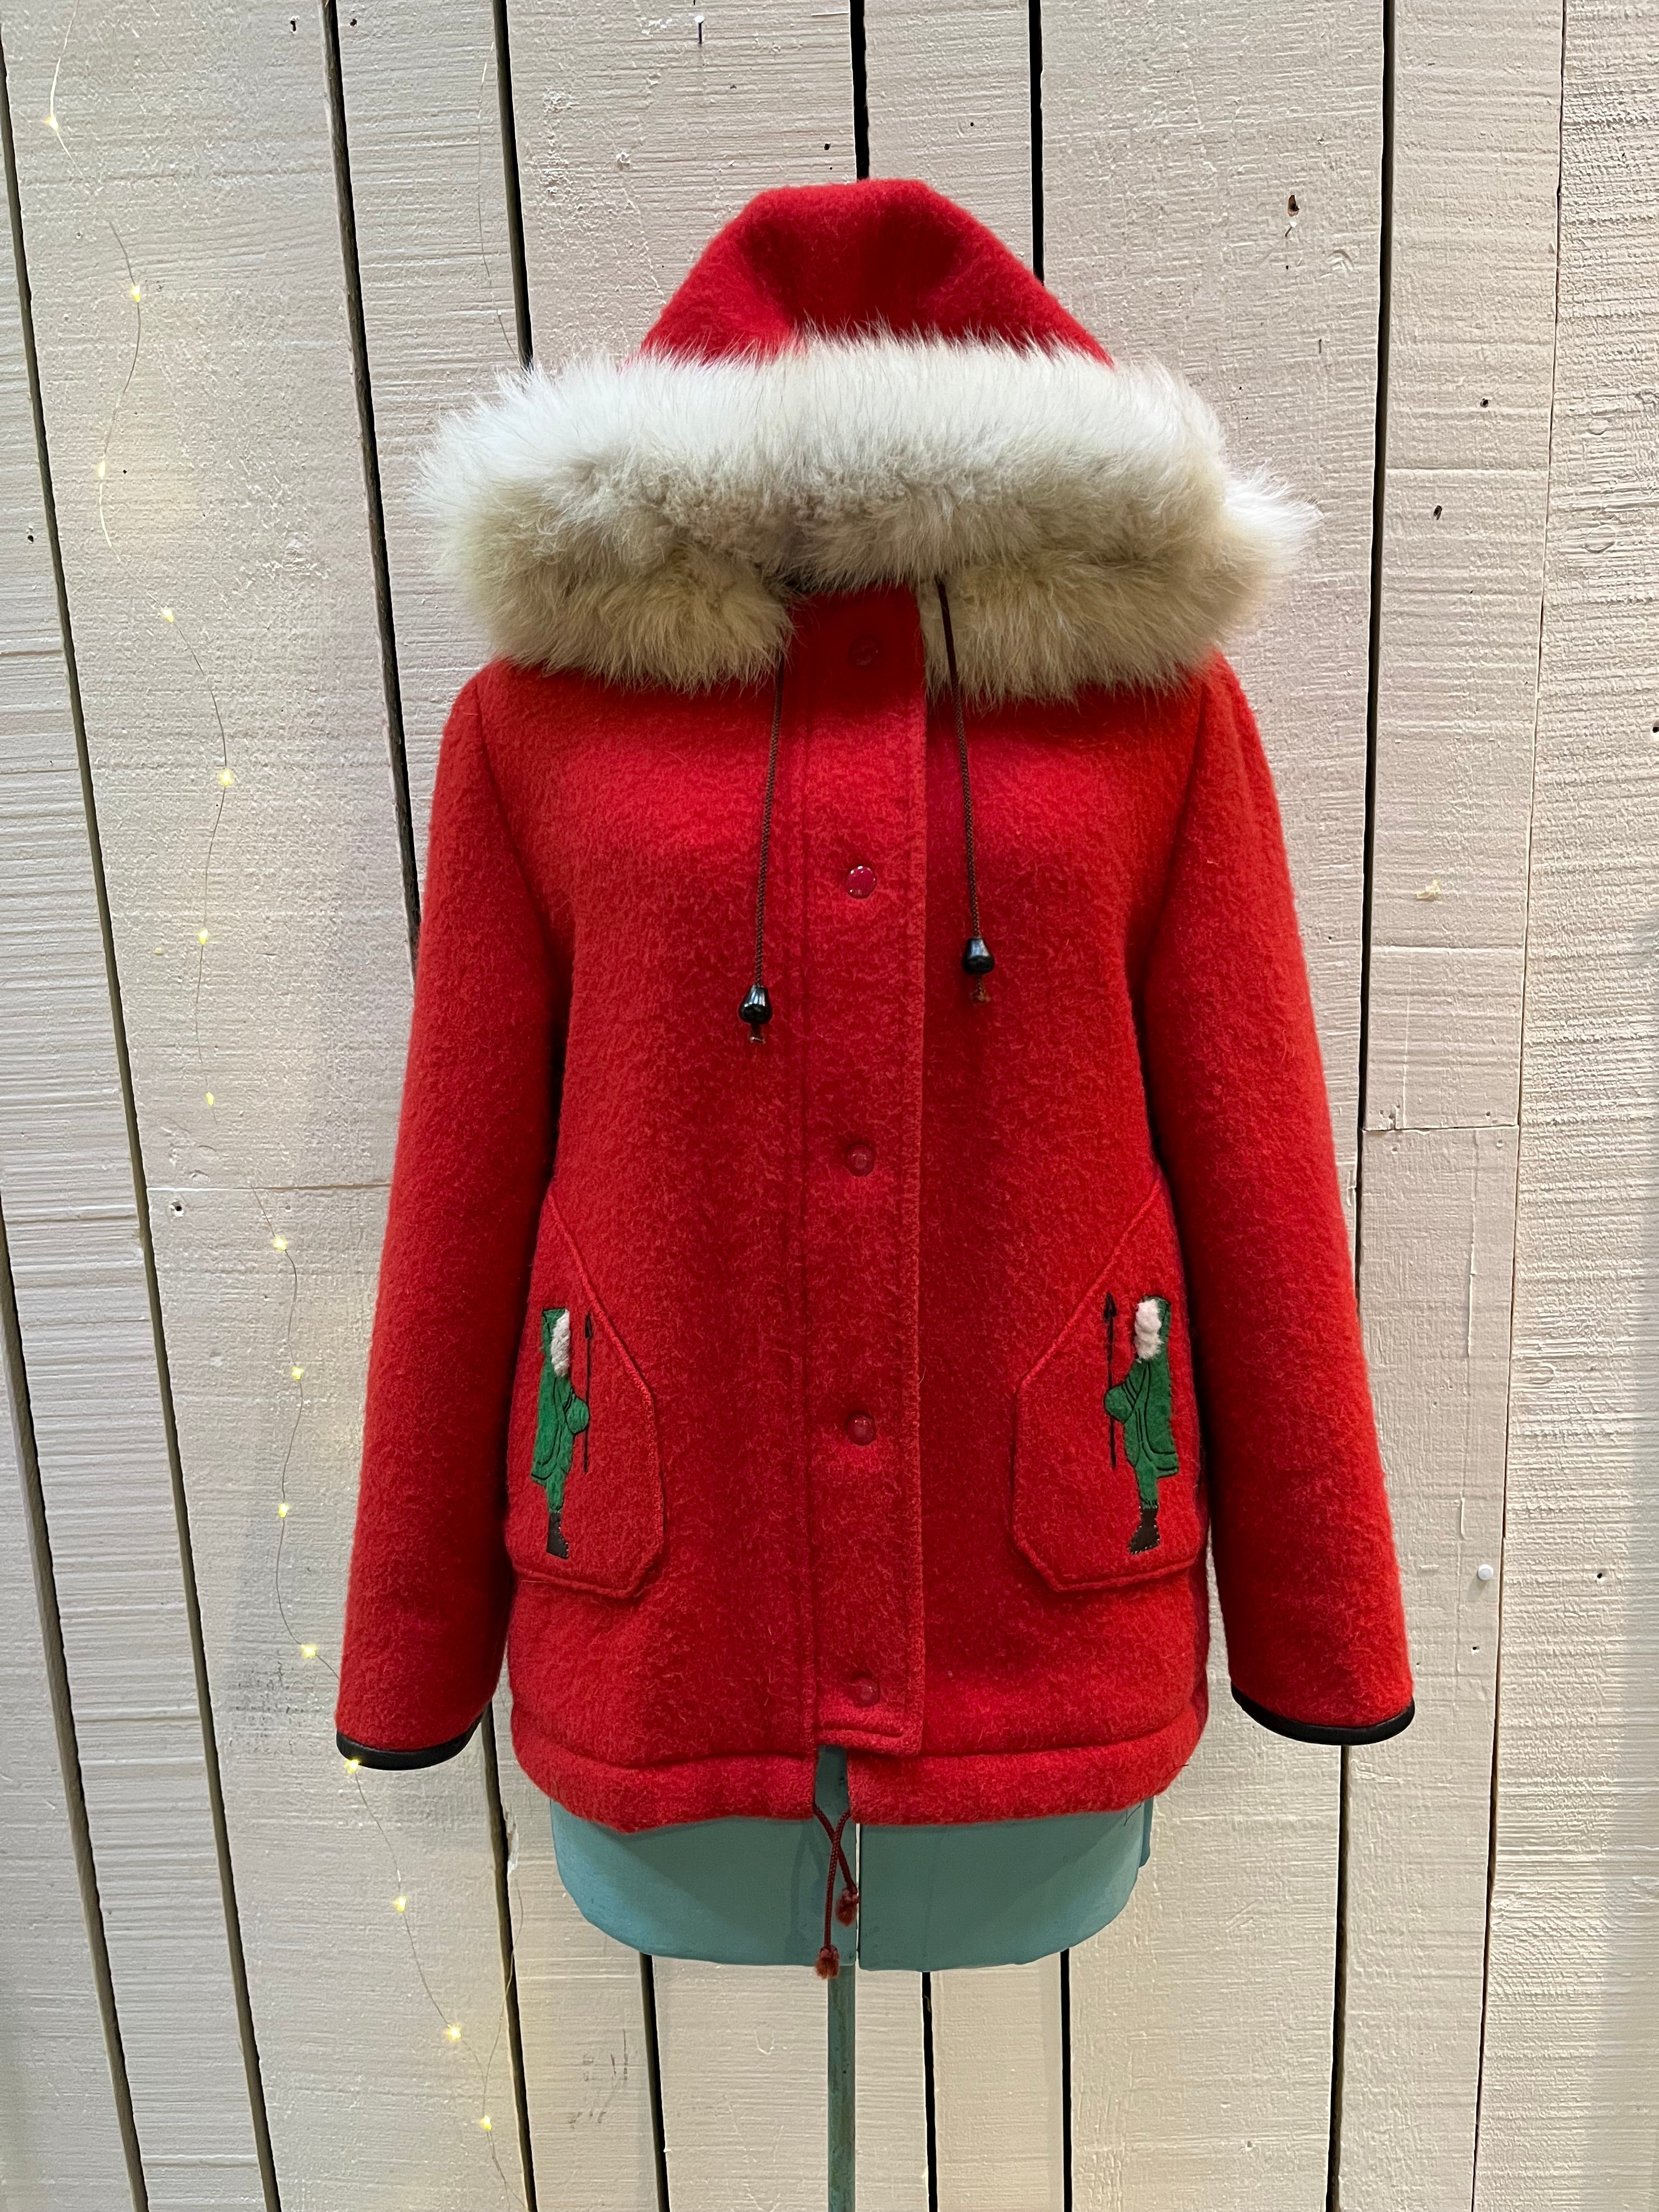 Vintage James Bay Red Wool Northern Parka with White Fur